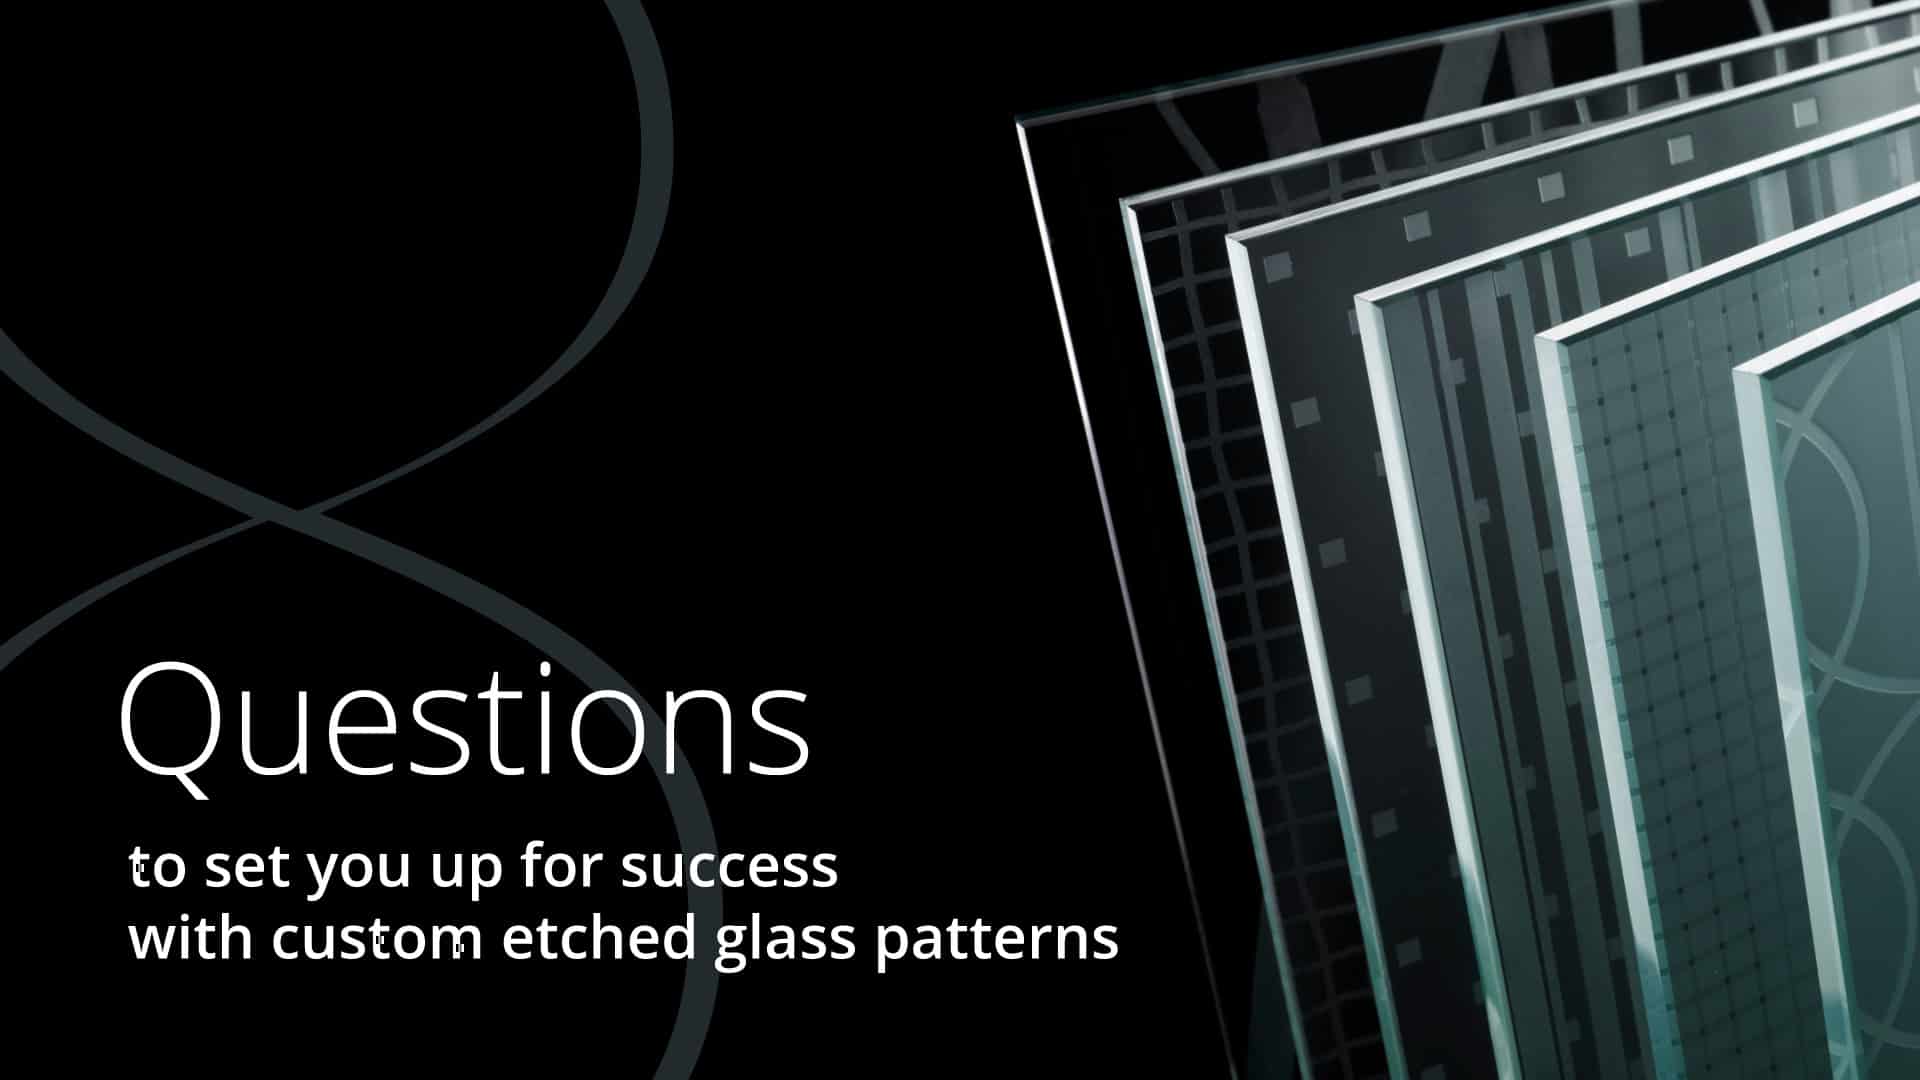 Eight Questions to Set You up for Success with Custom Etched Glass Patterns